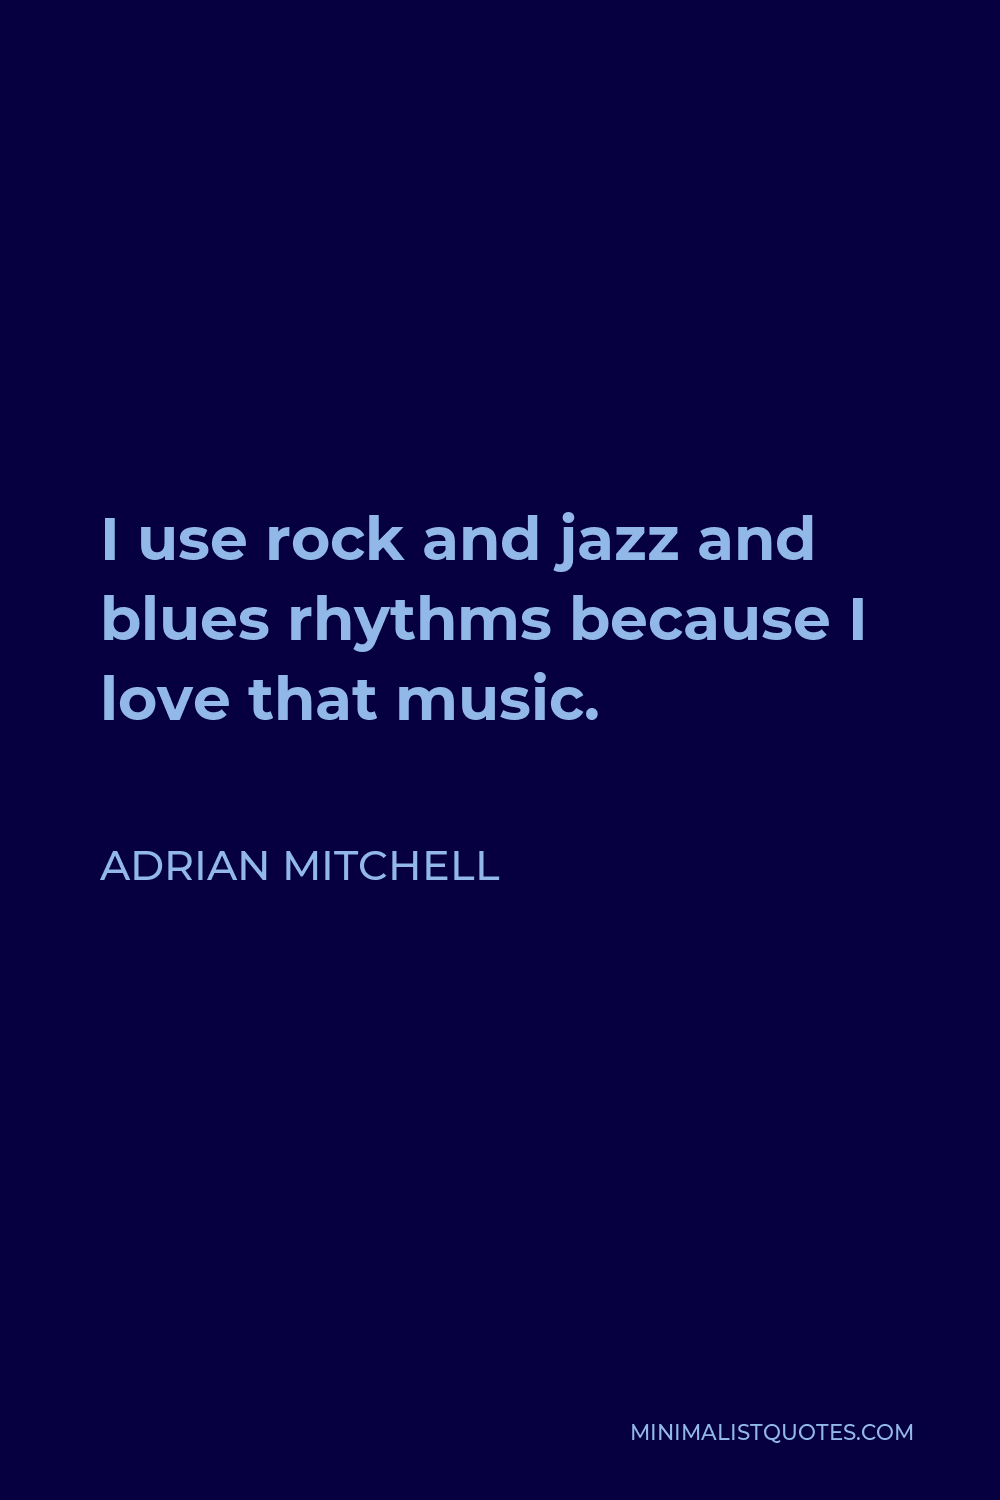 Adrian Mitchell Quote - I use rock and jazz and blues rhythms because I love that music.